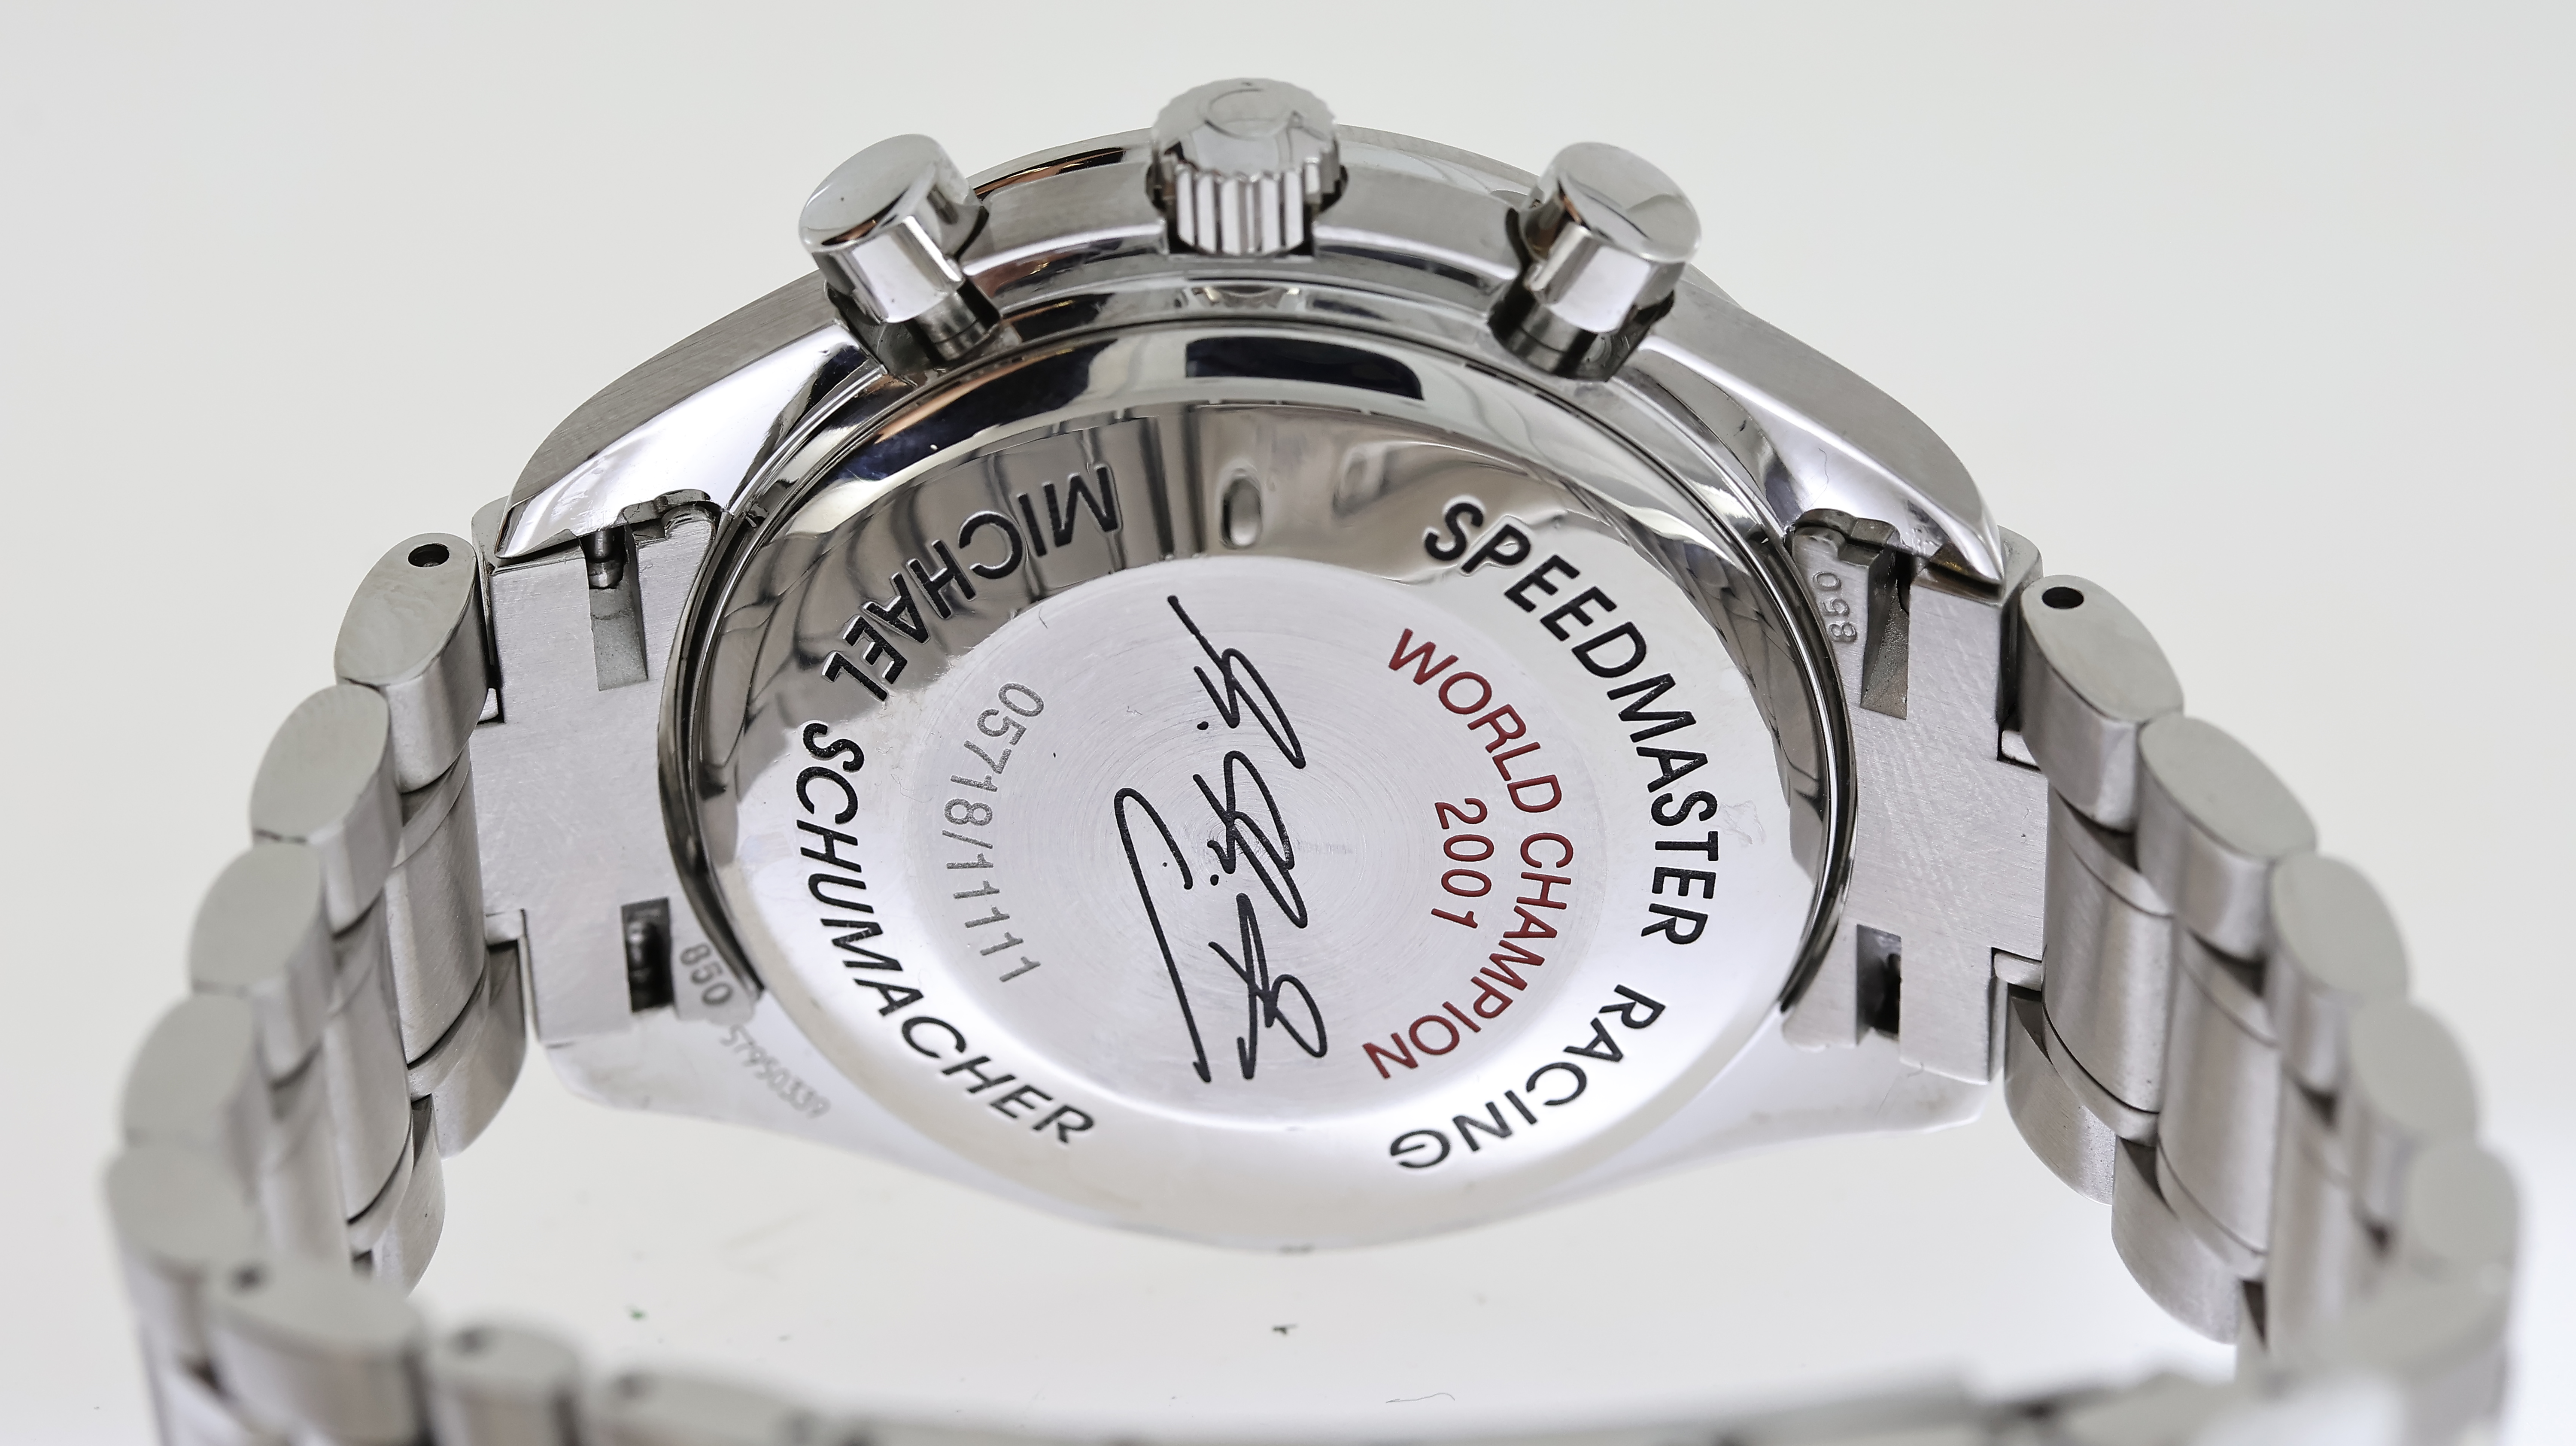 OMEGA SPEEDMASTER RACING MICHAEL SCHUMACHER BOX AND PAPERS 2005 - Image 5 of 5